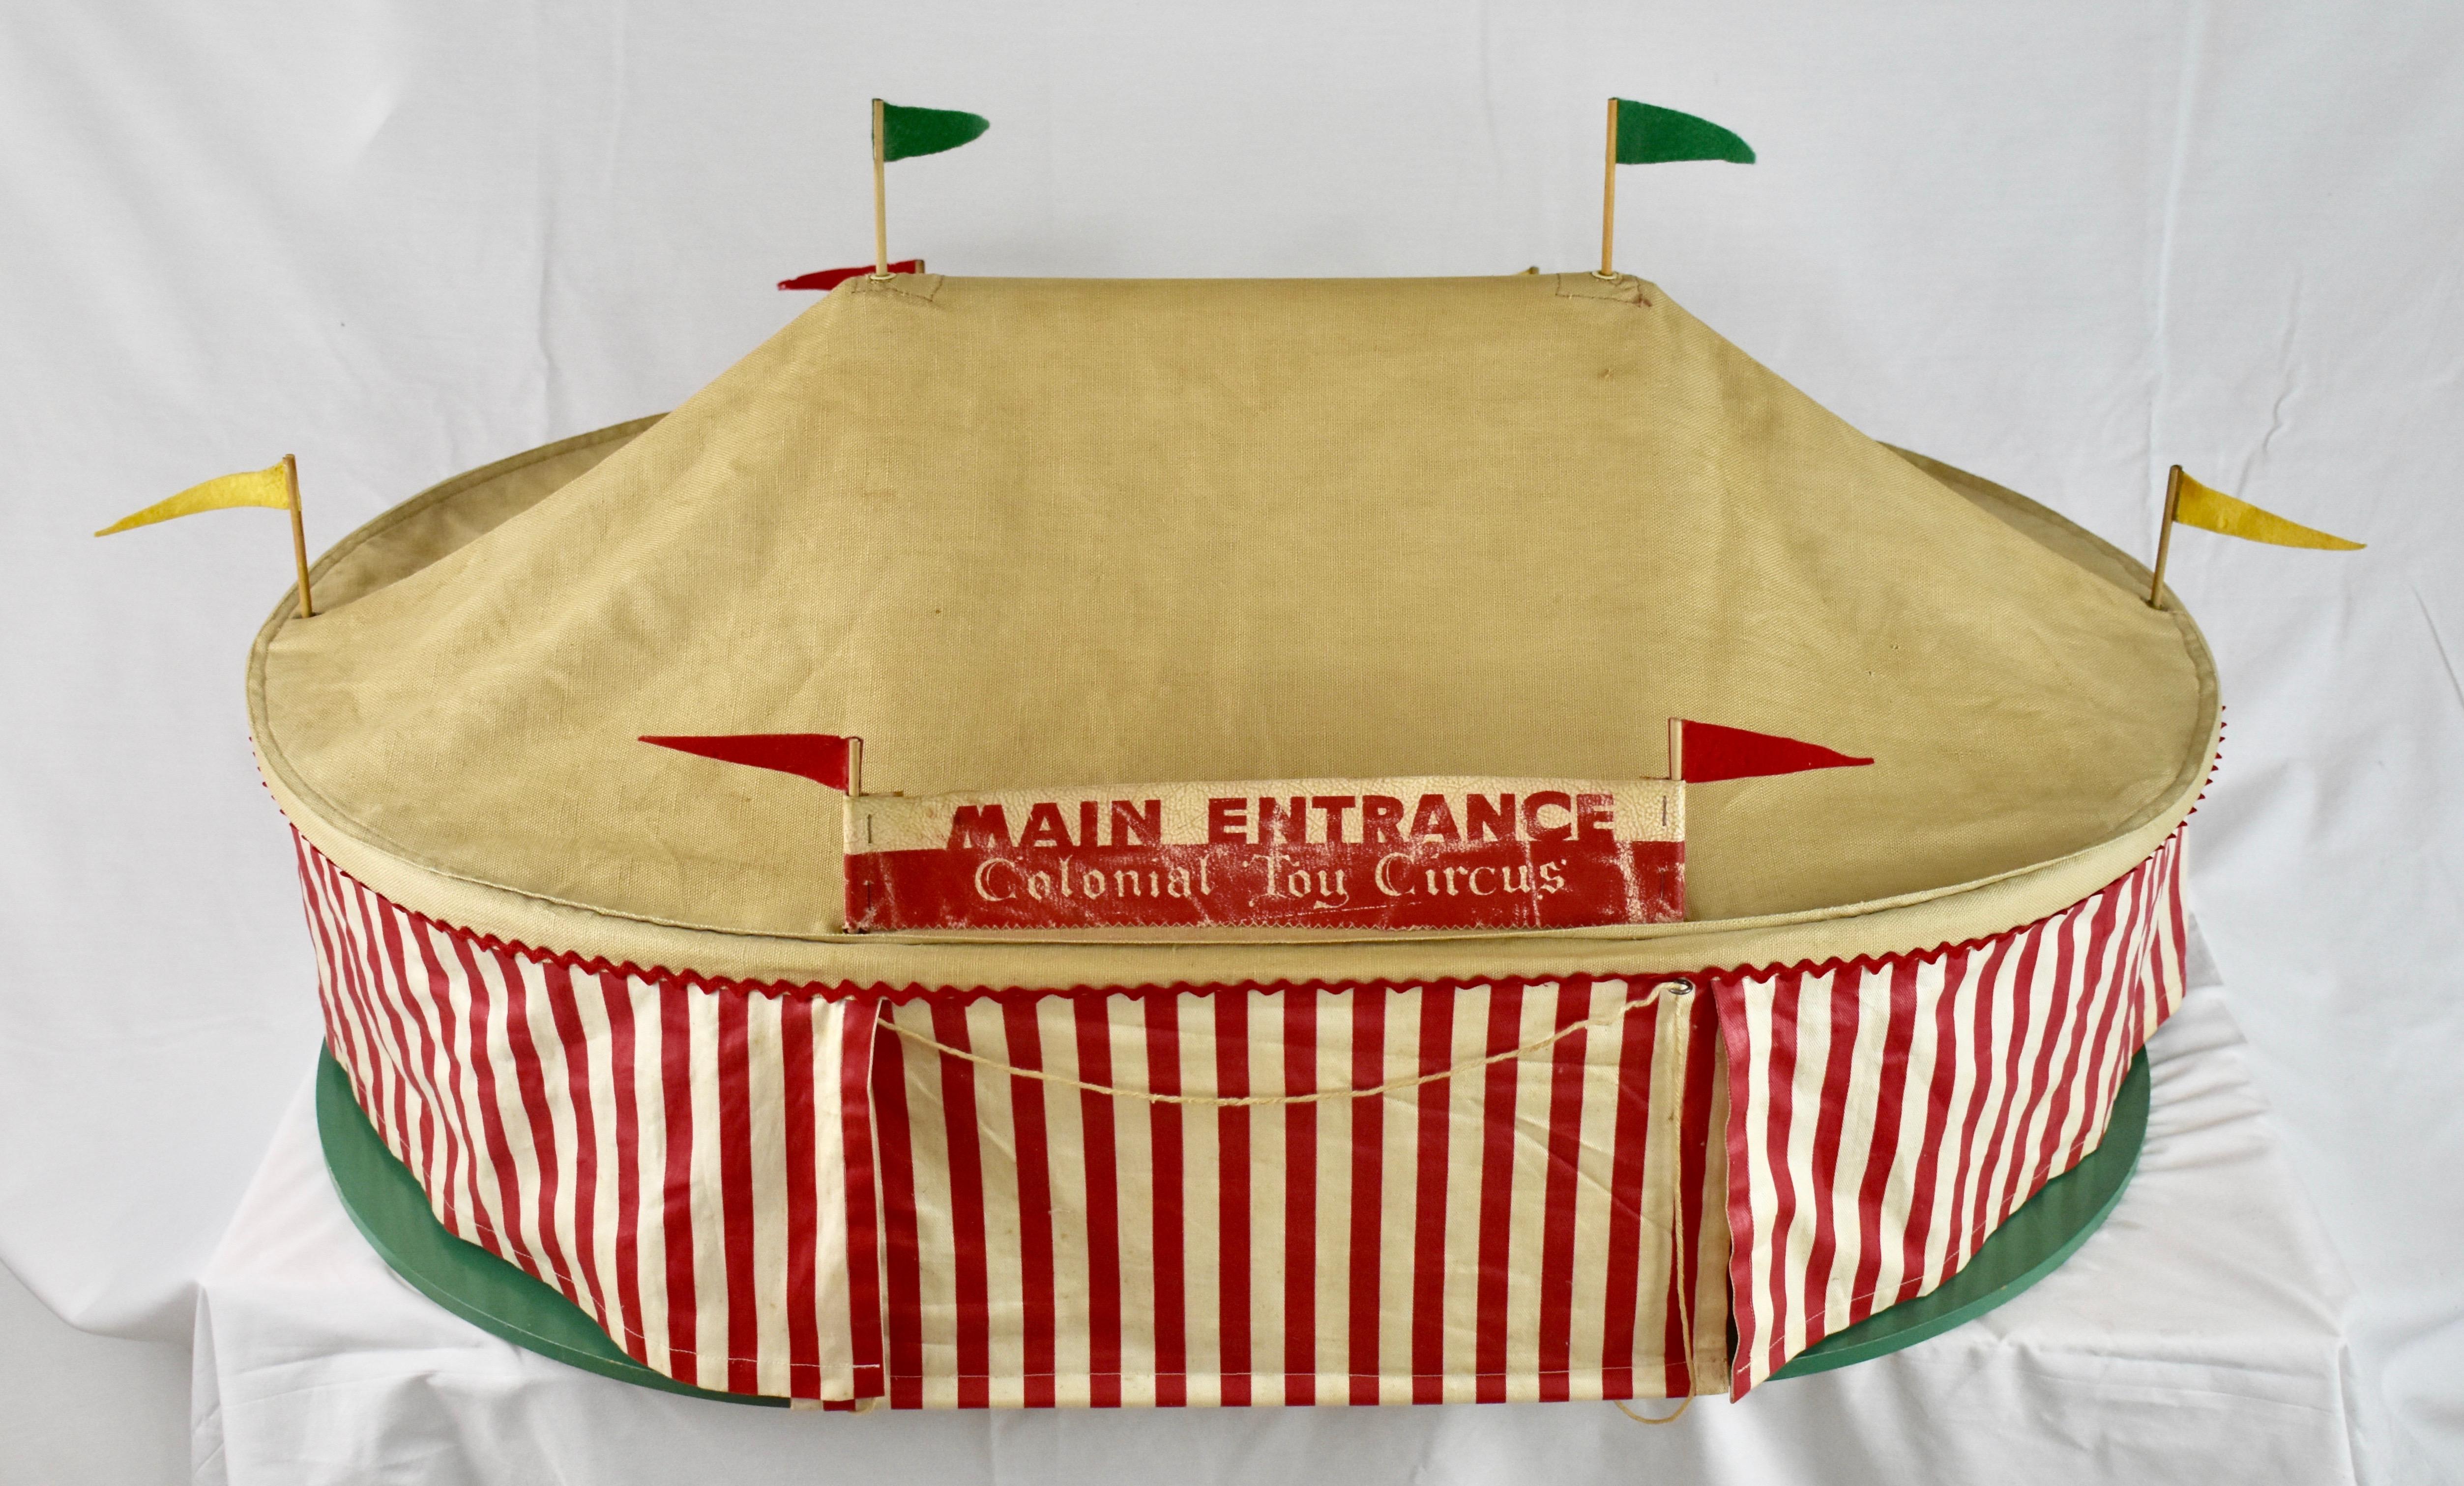 This is an extremely rare toy circus, the “Colonial Toy Circus” by Allison Designs of Oak Park, Illinois. The set, which we do not claim is complete, is comprised of a canvas big top mounted on a 0.5” thick wooden base. The interior floor has a